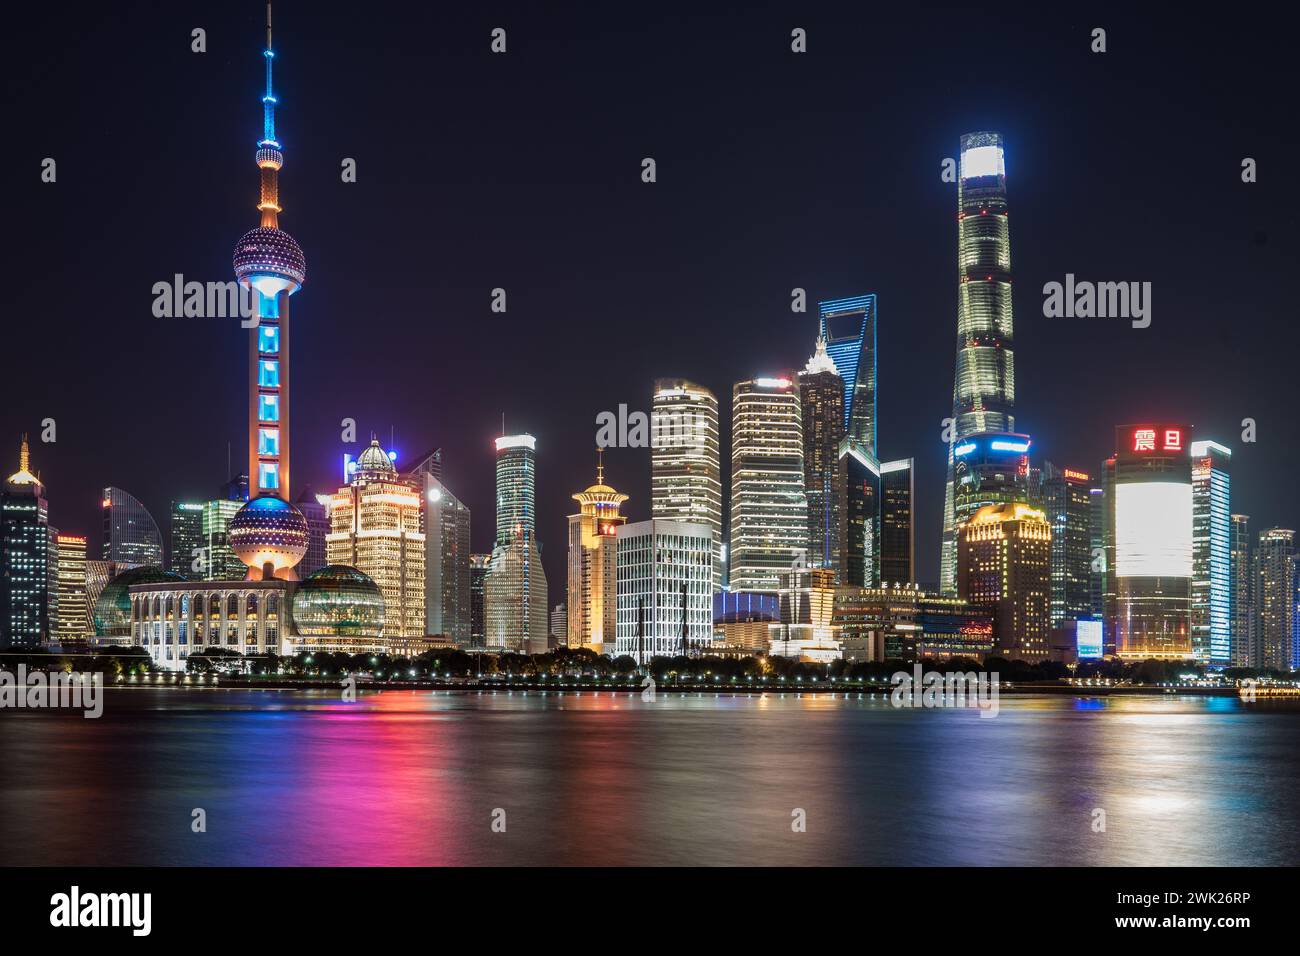 City skyline illuminated with blue and red lights Stock Photo